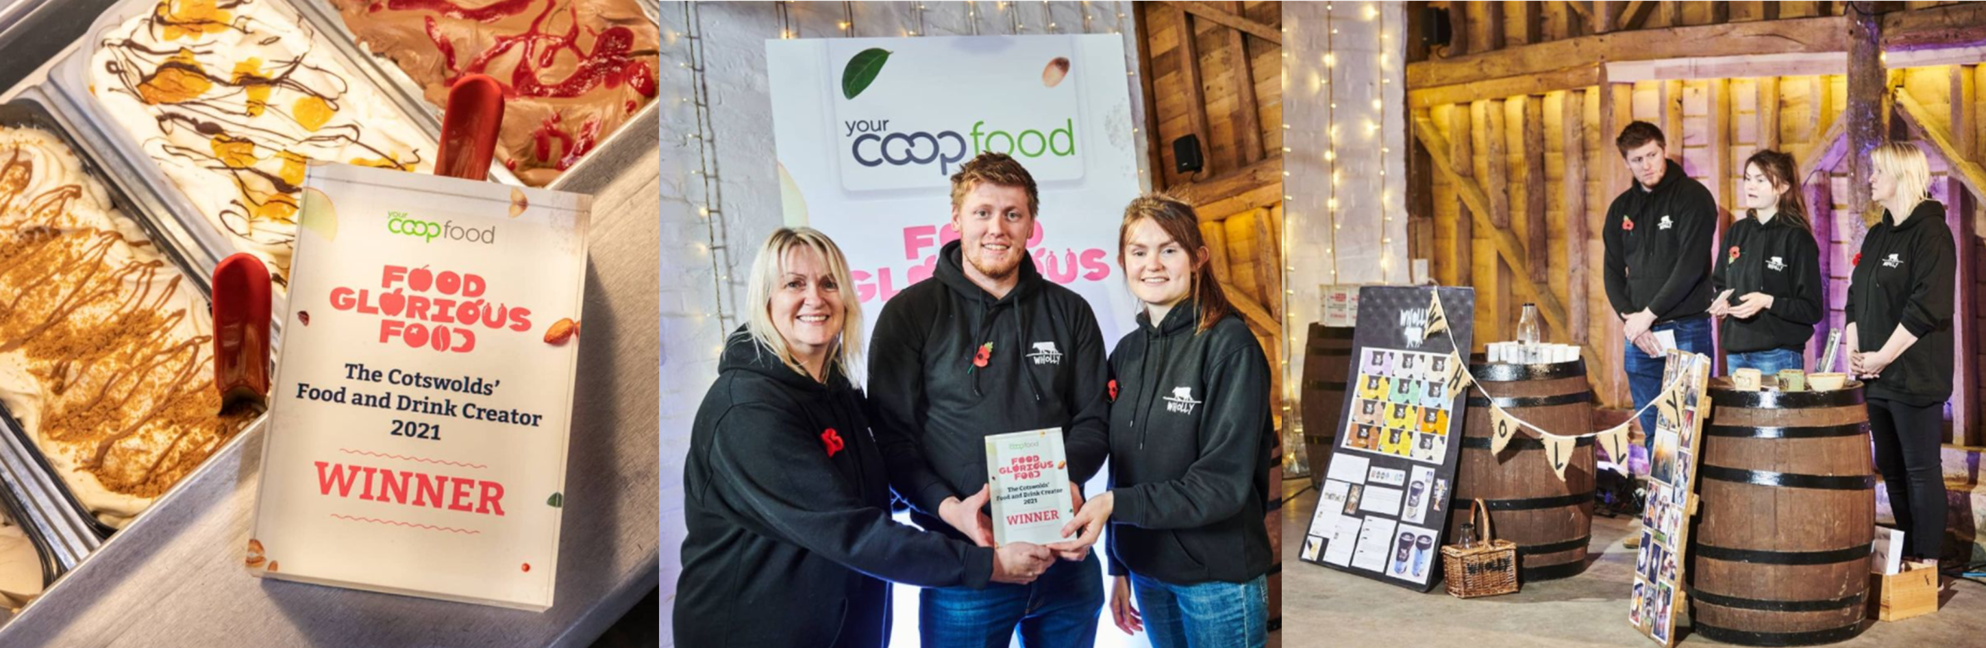 Gloucestershire Food Producer Wins £10K Investment From The Midcounties Co-operative